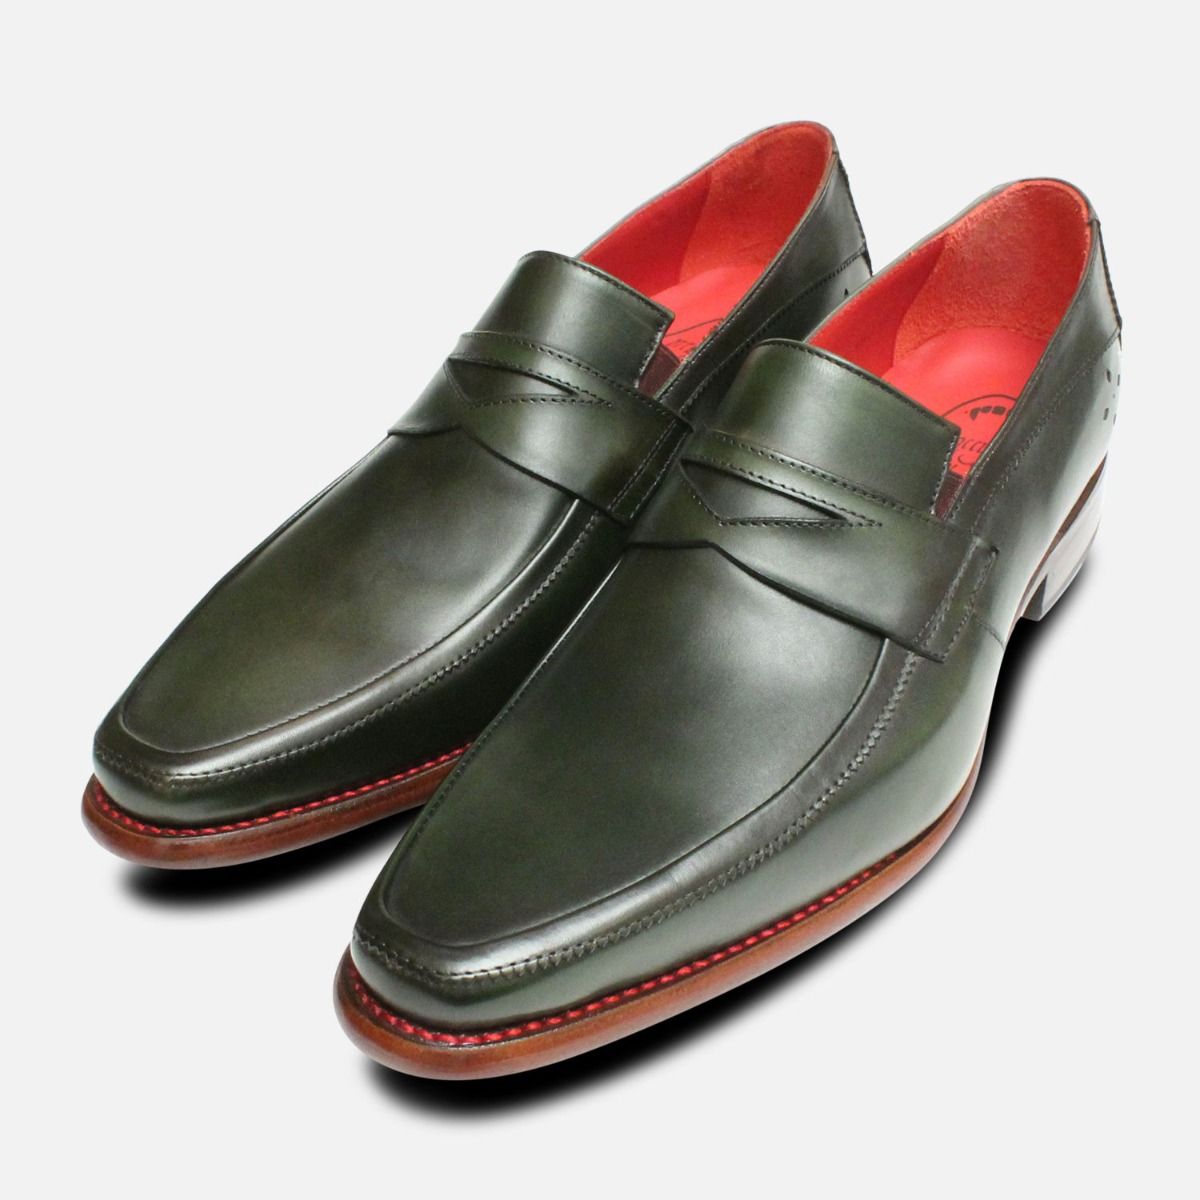 goodyear welted loafers